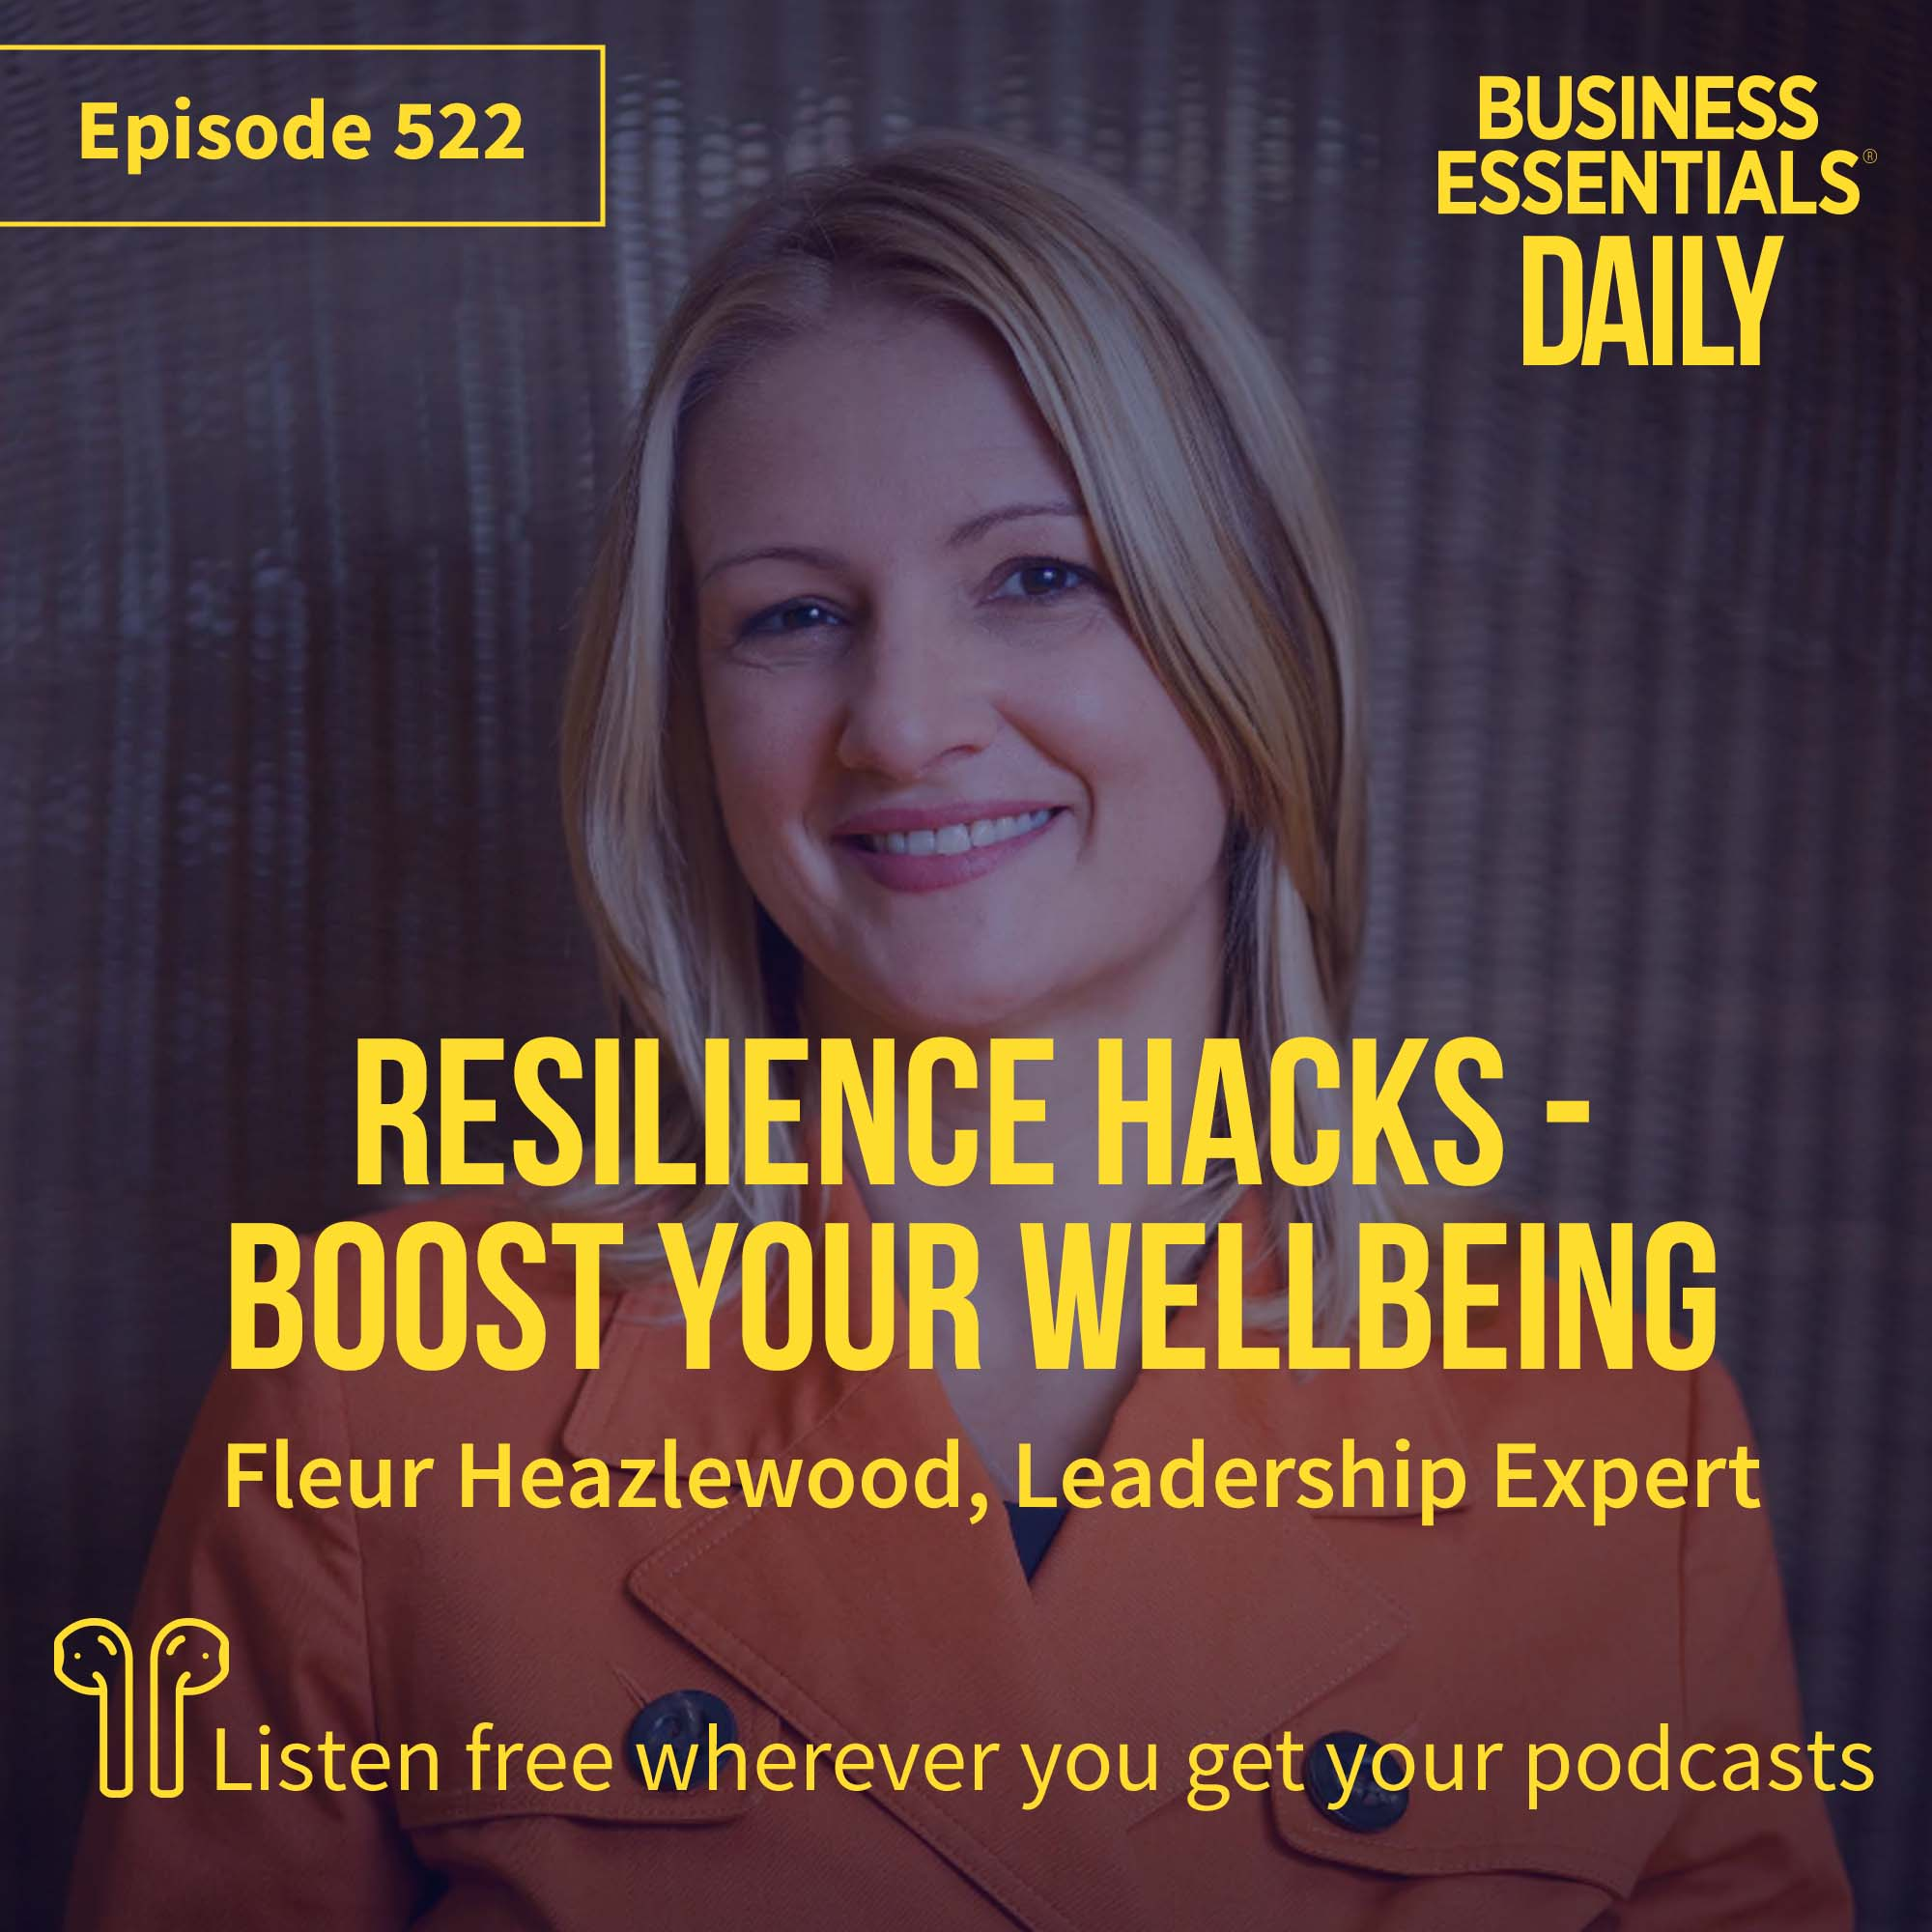 Resilience hacks - boost your wellbeing